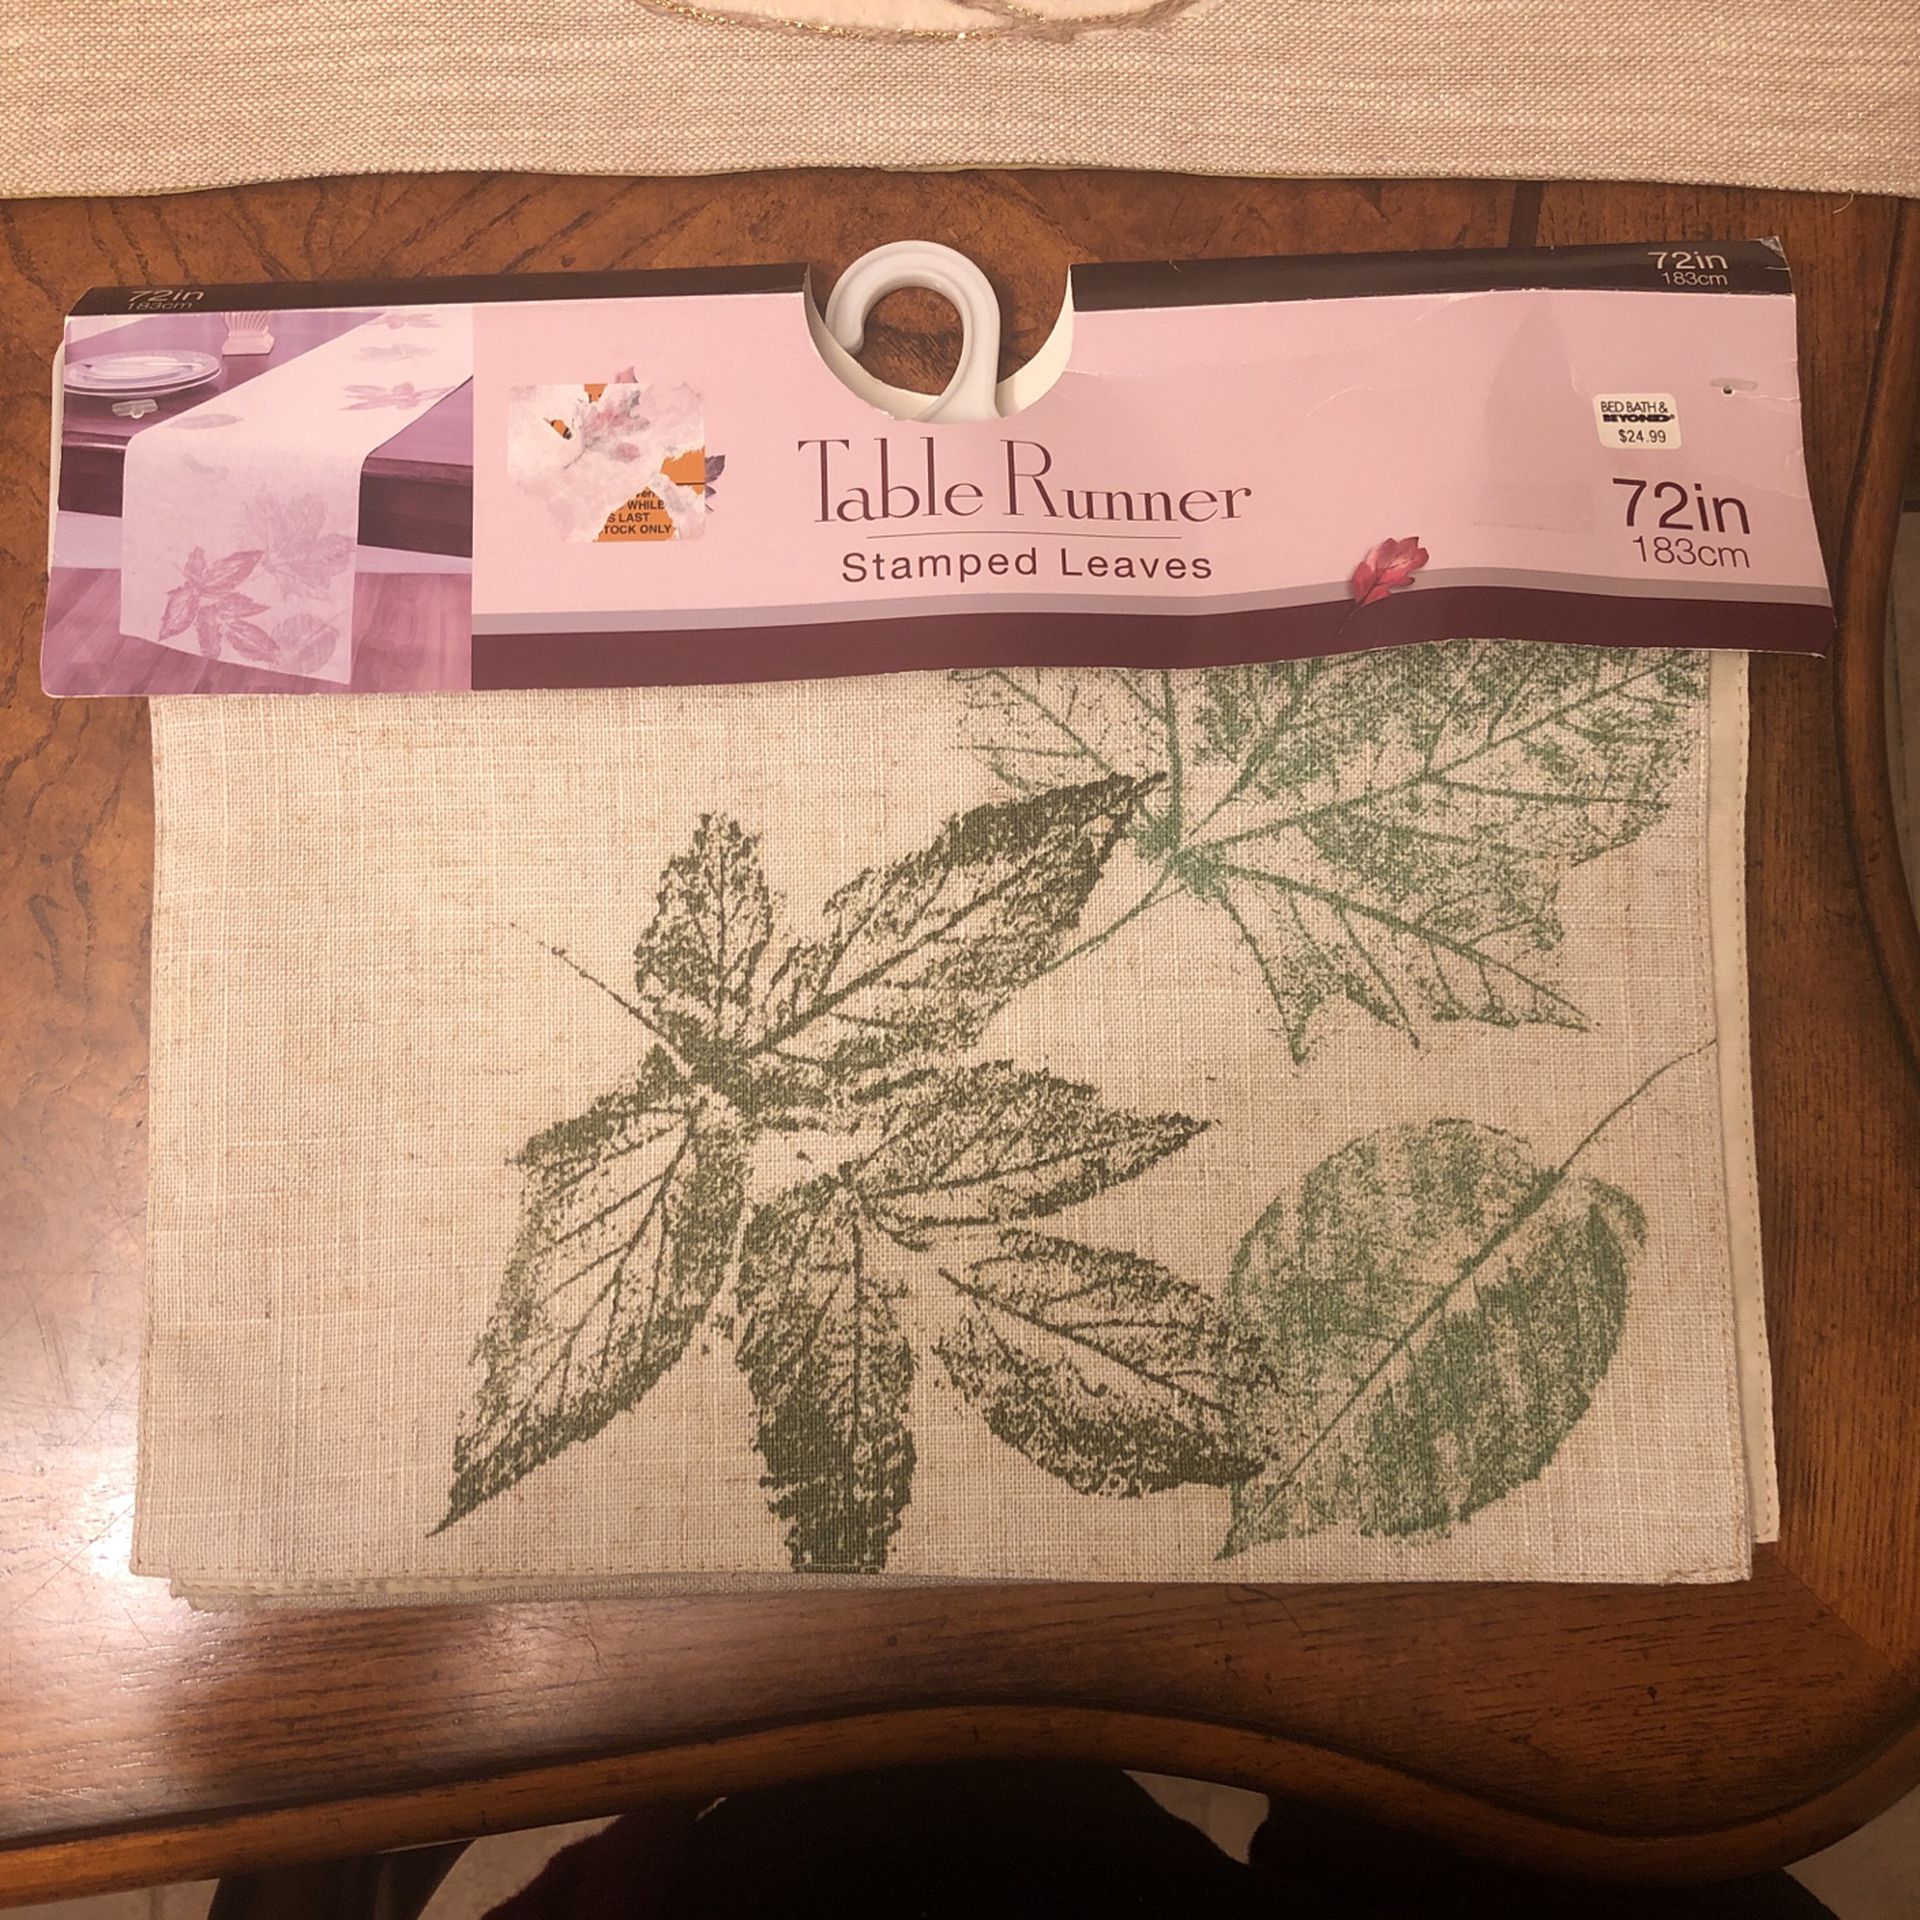 Table Runner Stamped Leaves 72 In